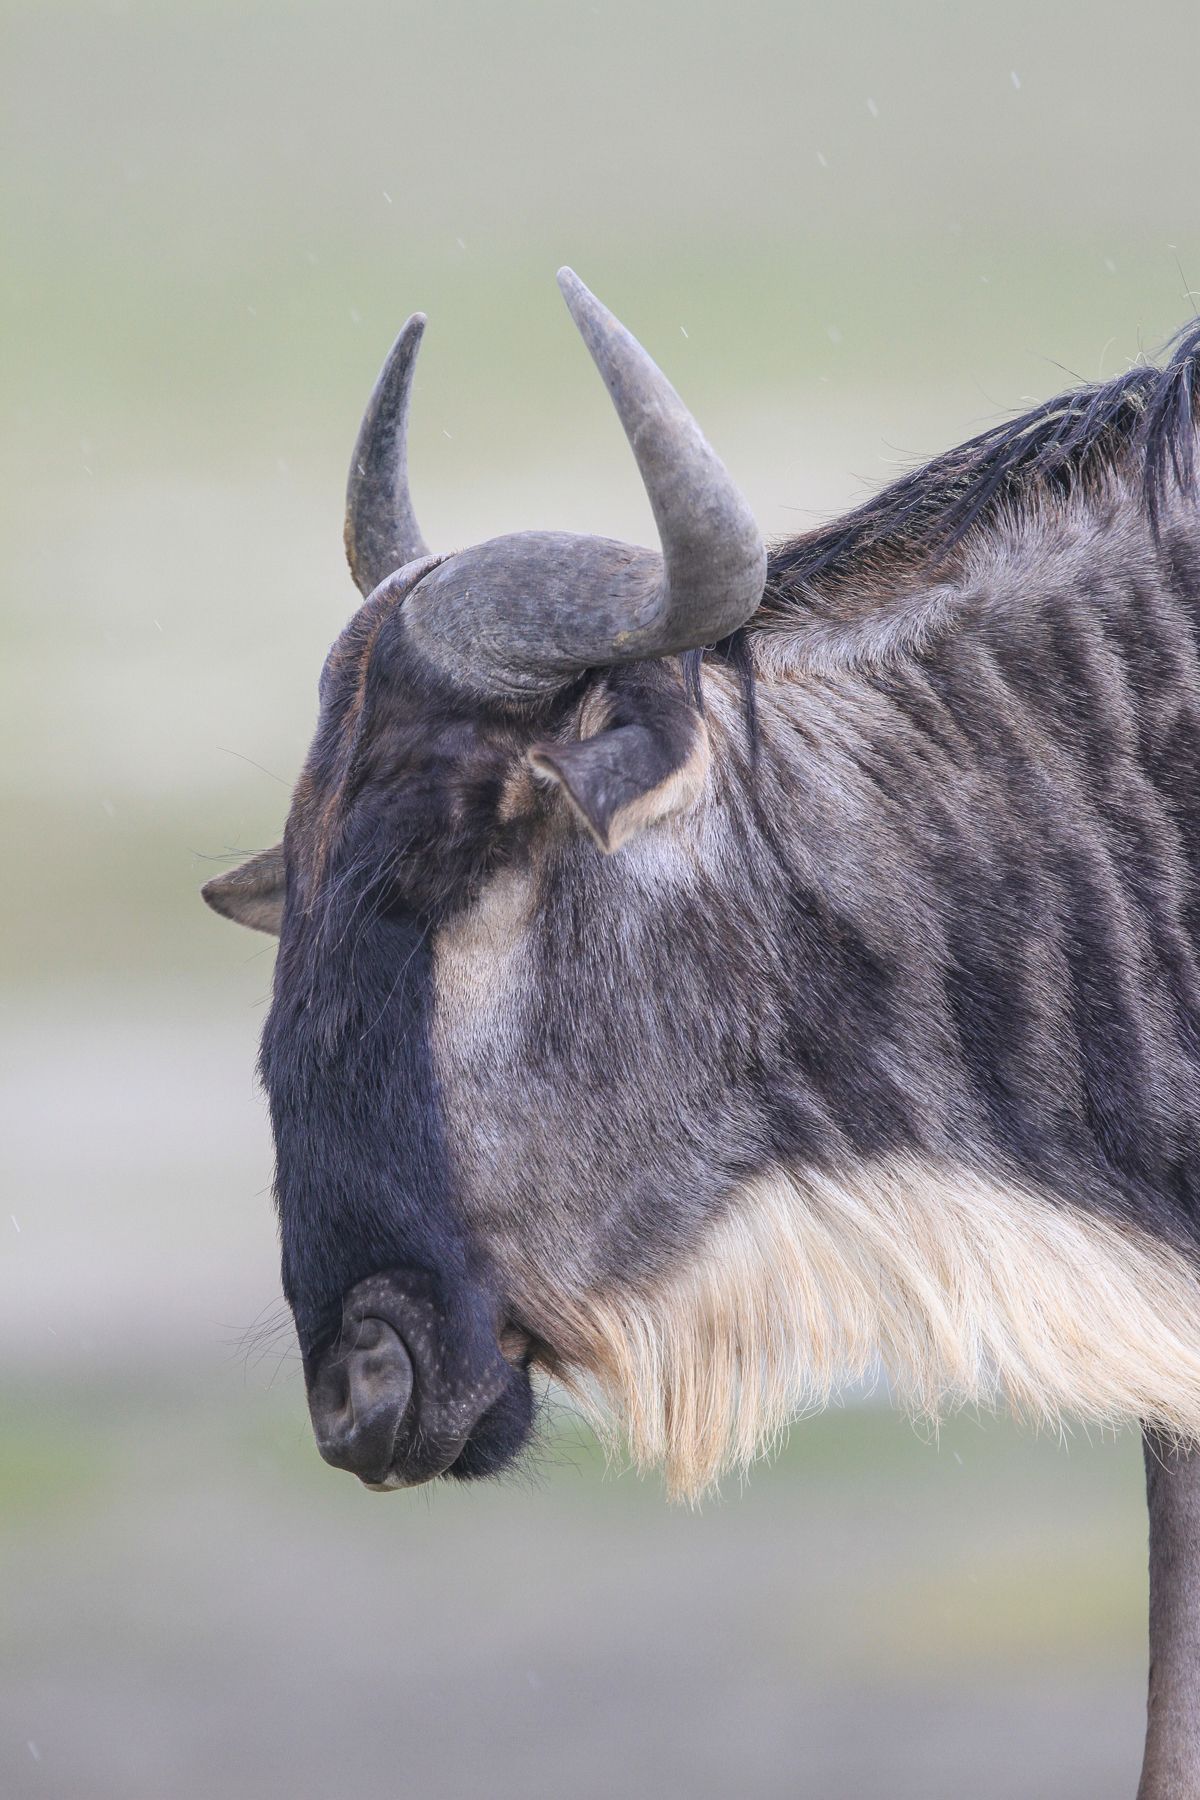 The wildebeest often look brown, but in certain lights the bluish colouration comes to the fore